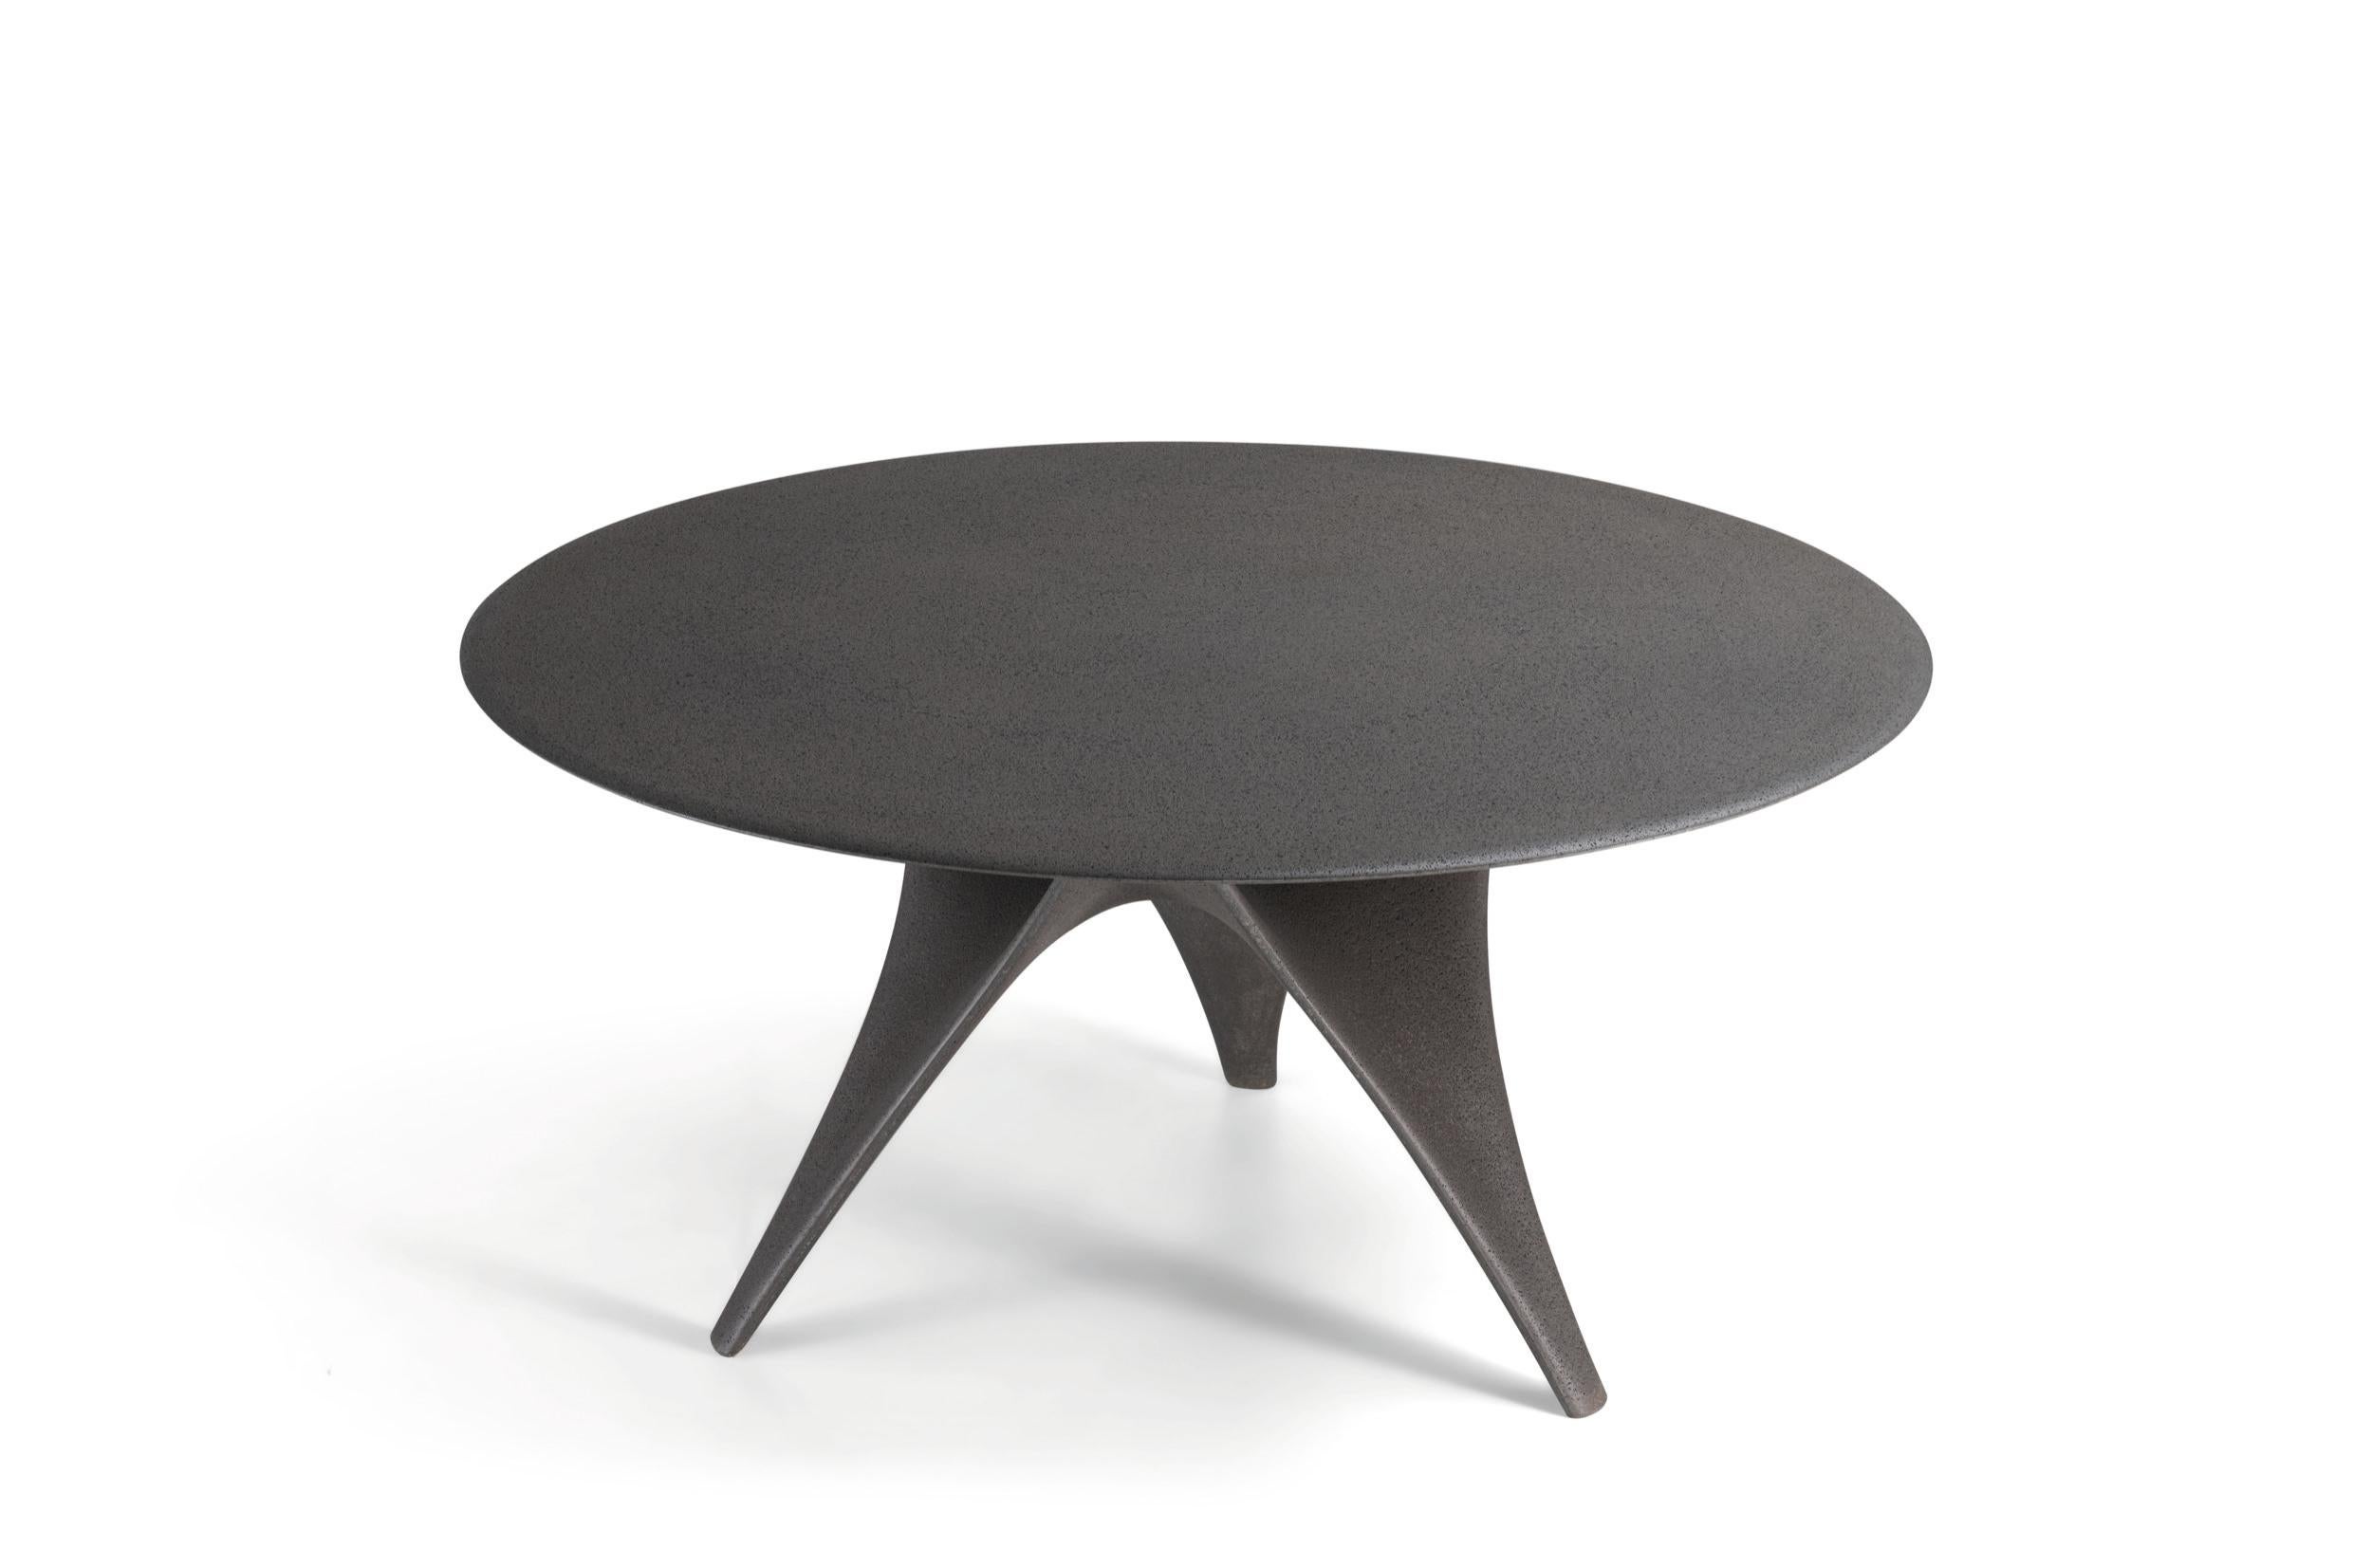 The Arc Table by Foster + Partners has been reimagined for outdoor living, with an all-cement finish. In Dolomite grey mono-material and monochrome finish, this weather-proof rendition embodies the same fluid forms as the indoor original and is